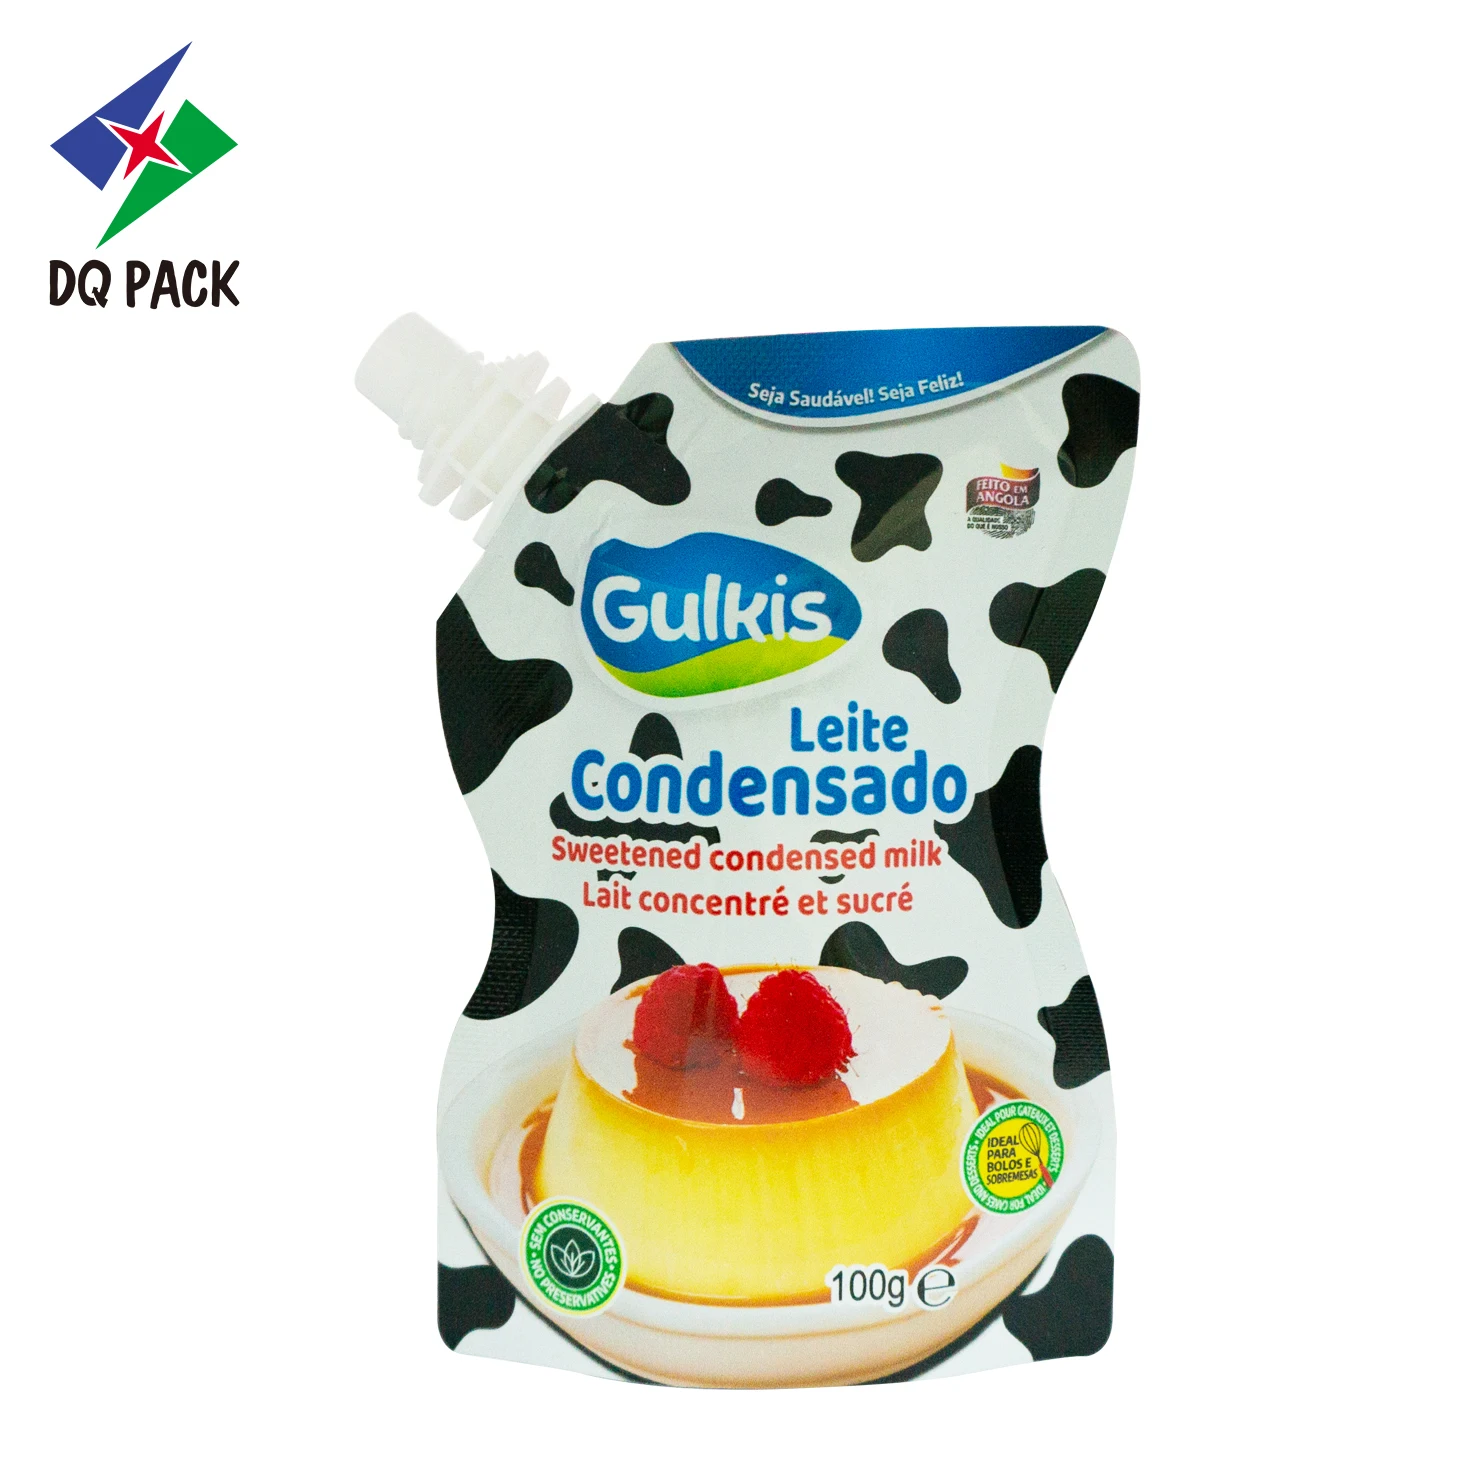 DQ PACK customized printing reusable liquid drink pouch stand up doypack with spout for water,,detergent,juice pouch